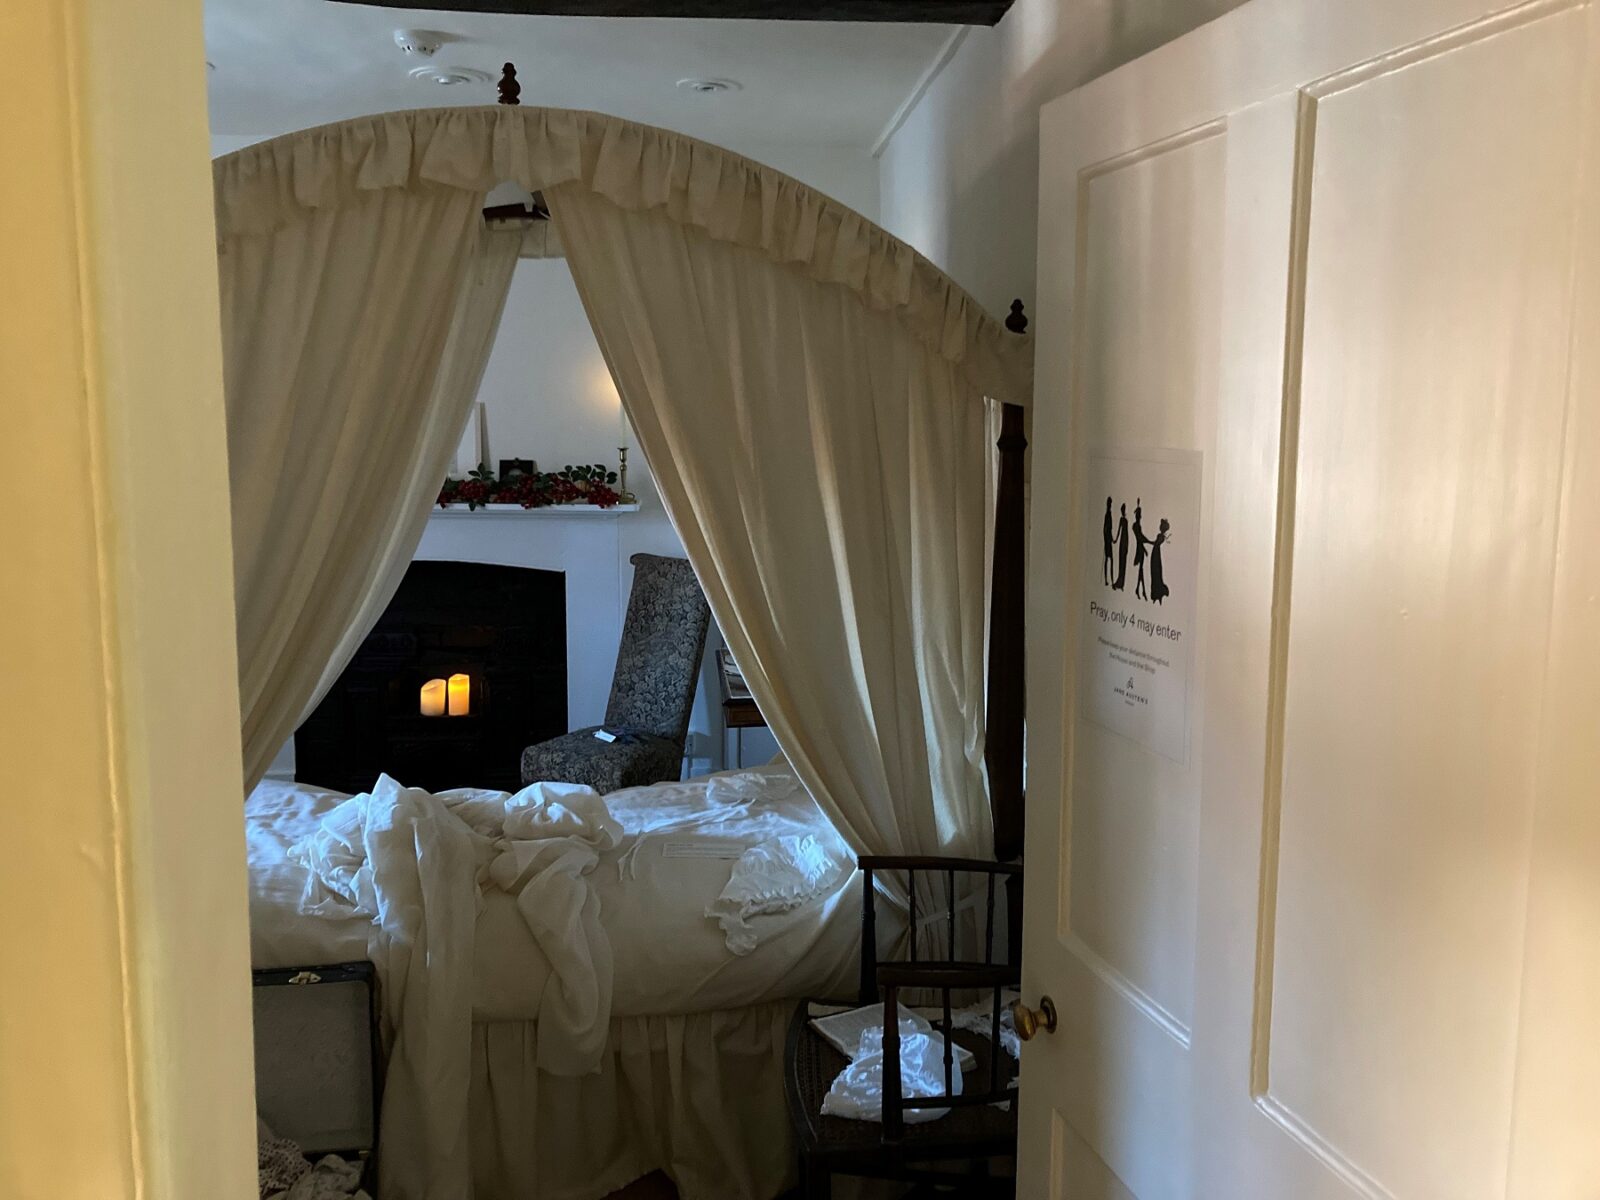 A scene from our winter exhibition, 'Six Winters': Scenes from Jane Austen's life & Imagination. This is Jane Austen's bedroom, dressed to recreate the scene of her birth with piles of washing and baby things on the bed and floor. Lit by candles and by the cold winter light from the window.